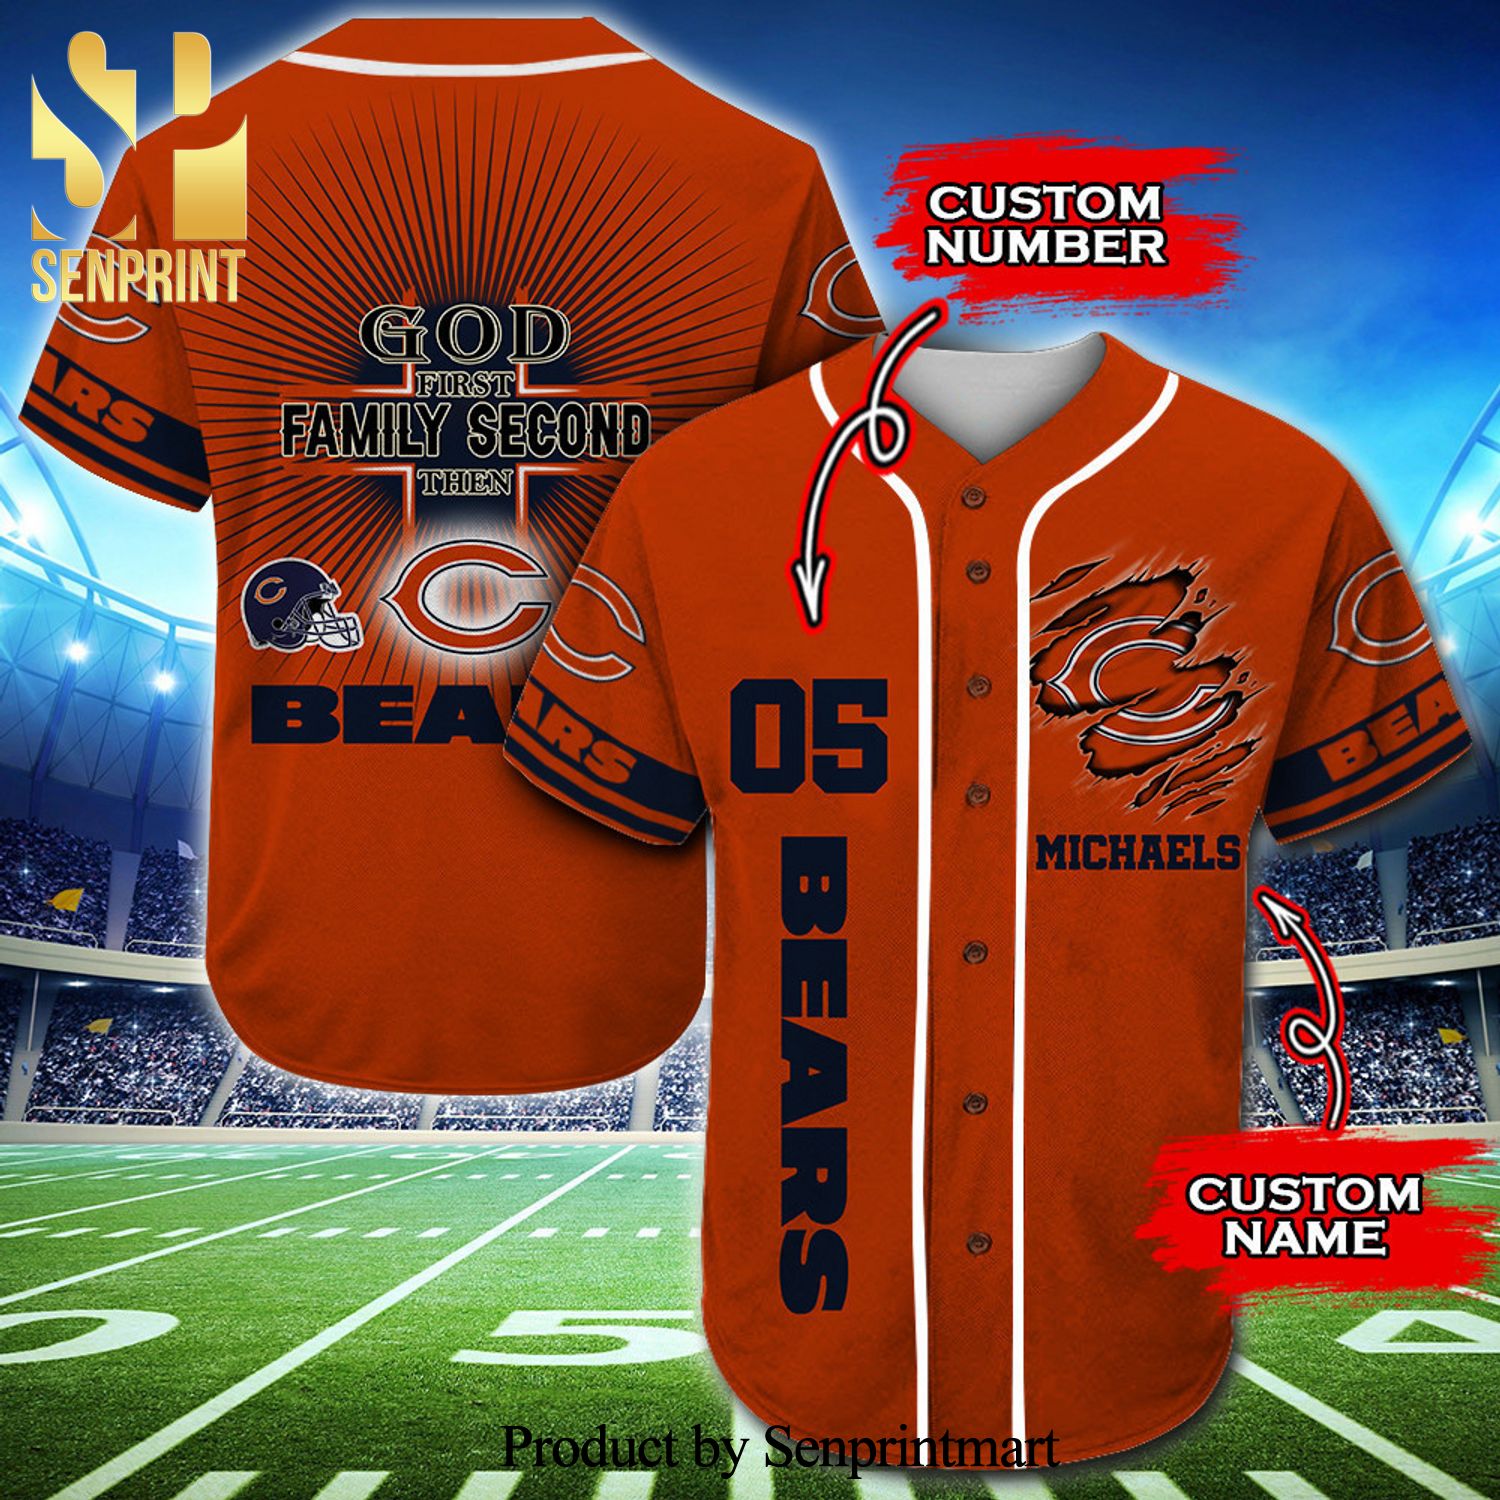 Personalized Chicago Bears God First Family Second Full Printing Baseball Jersey